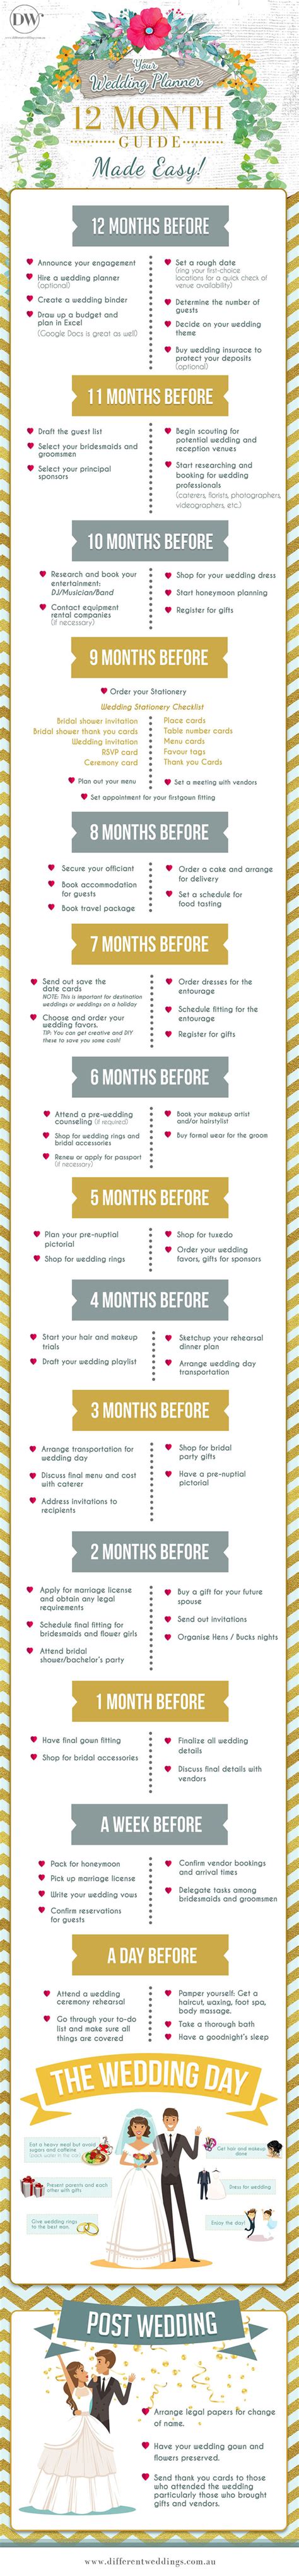 12 Month Wedding Planner A Step By Step Guide Plyvine Catering